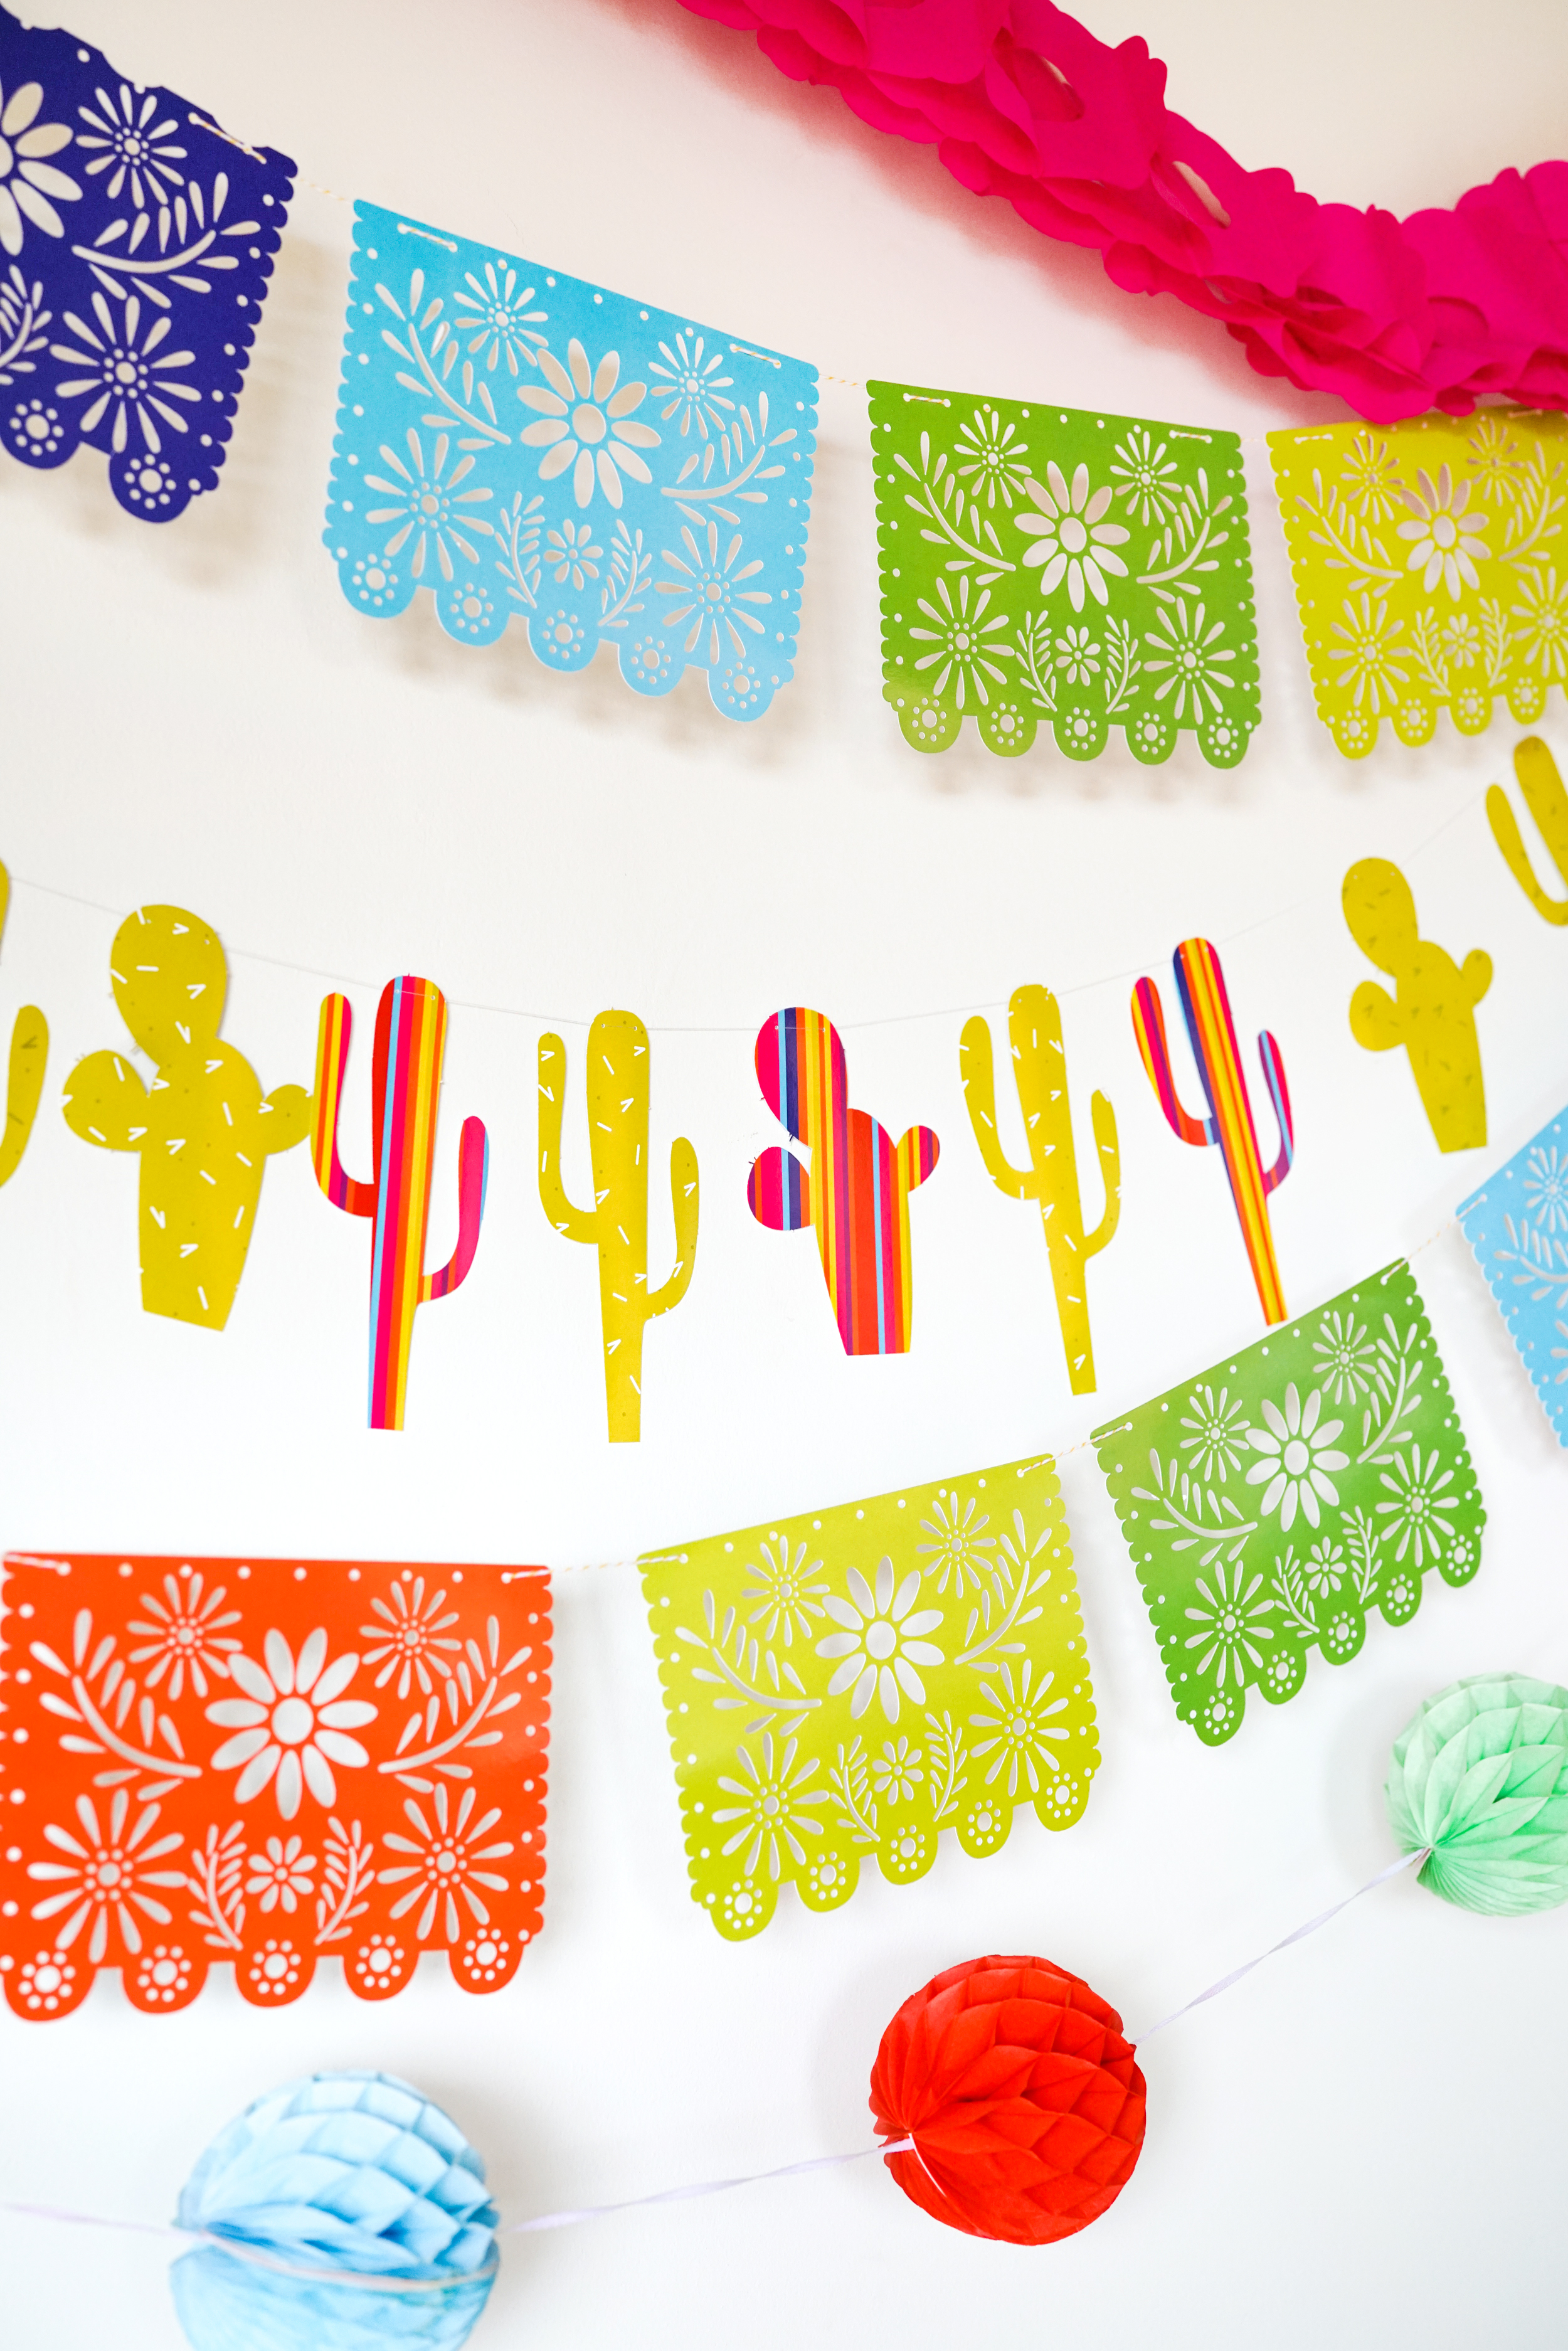 Mexican Fiesta Cactus Garland SVG cut out template file